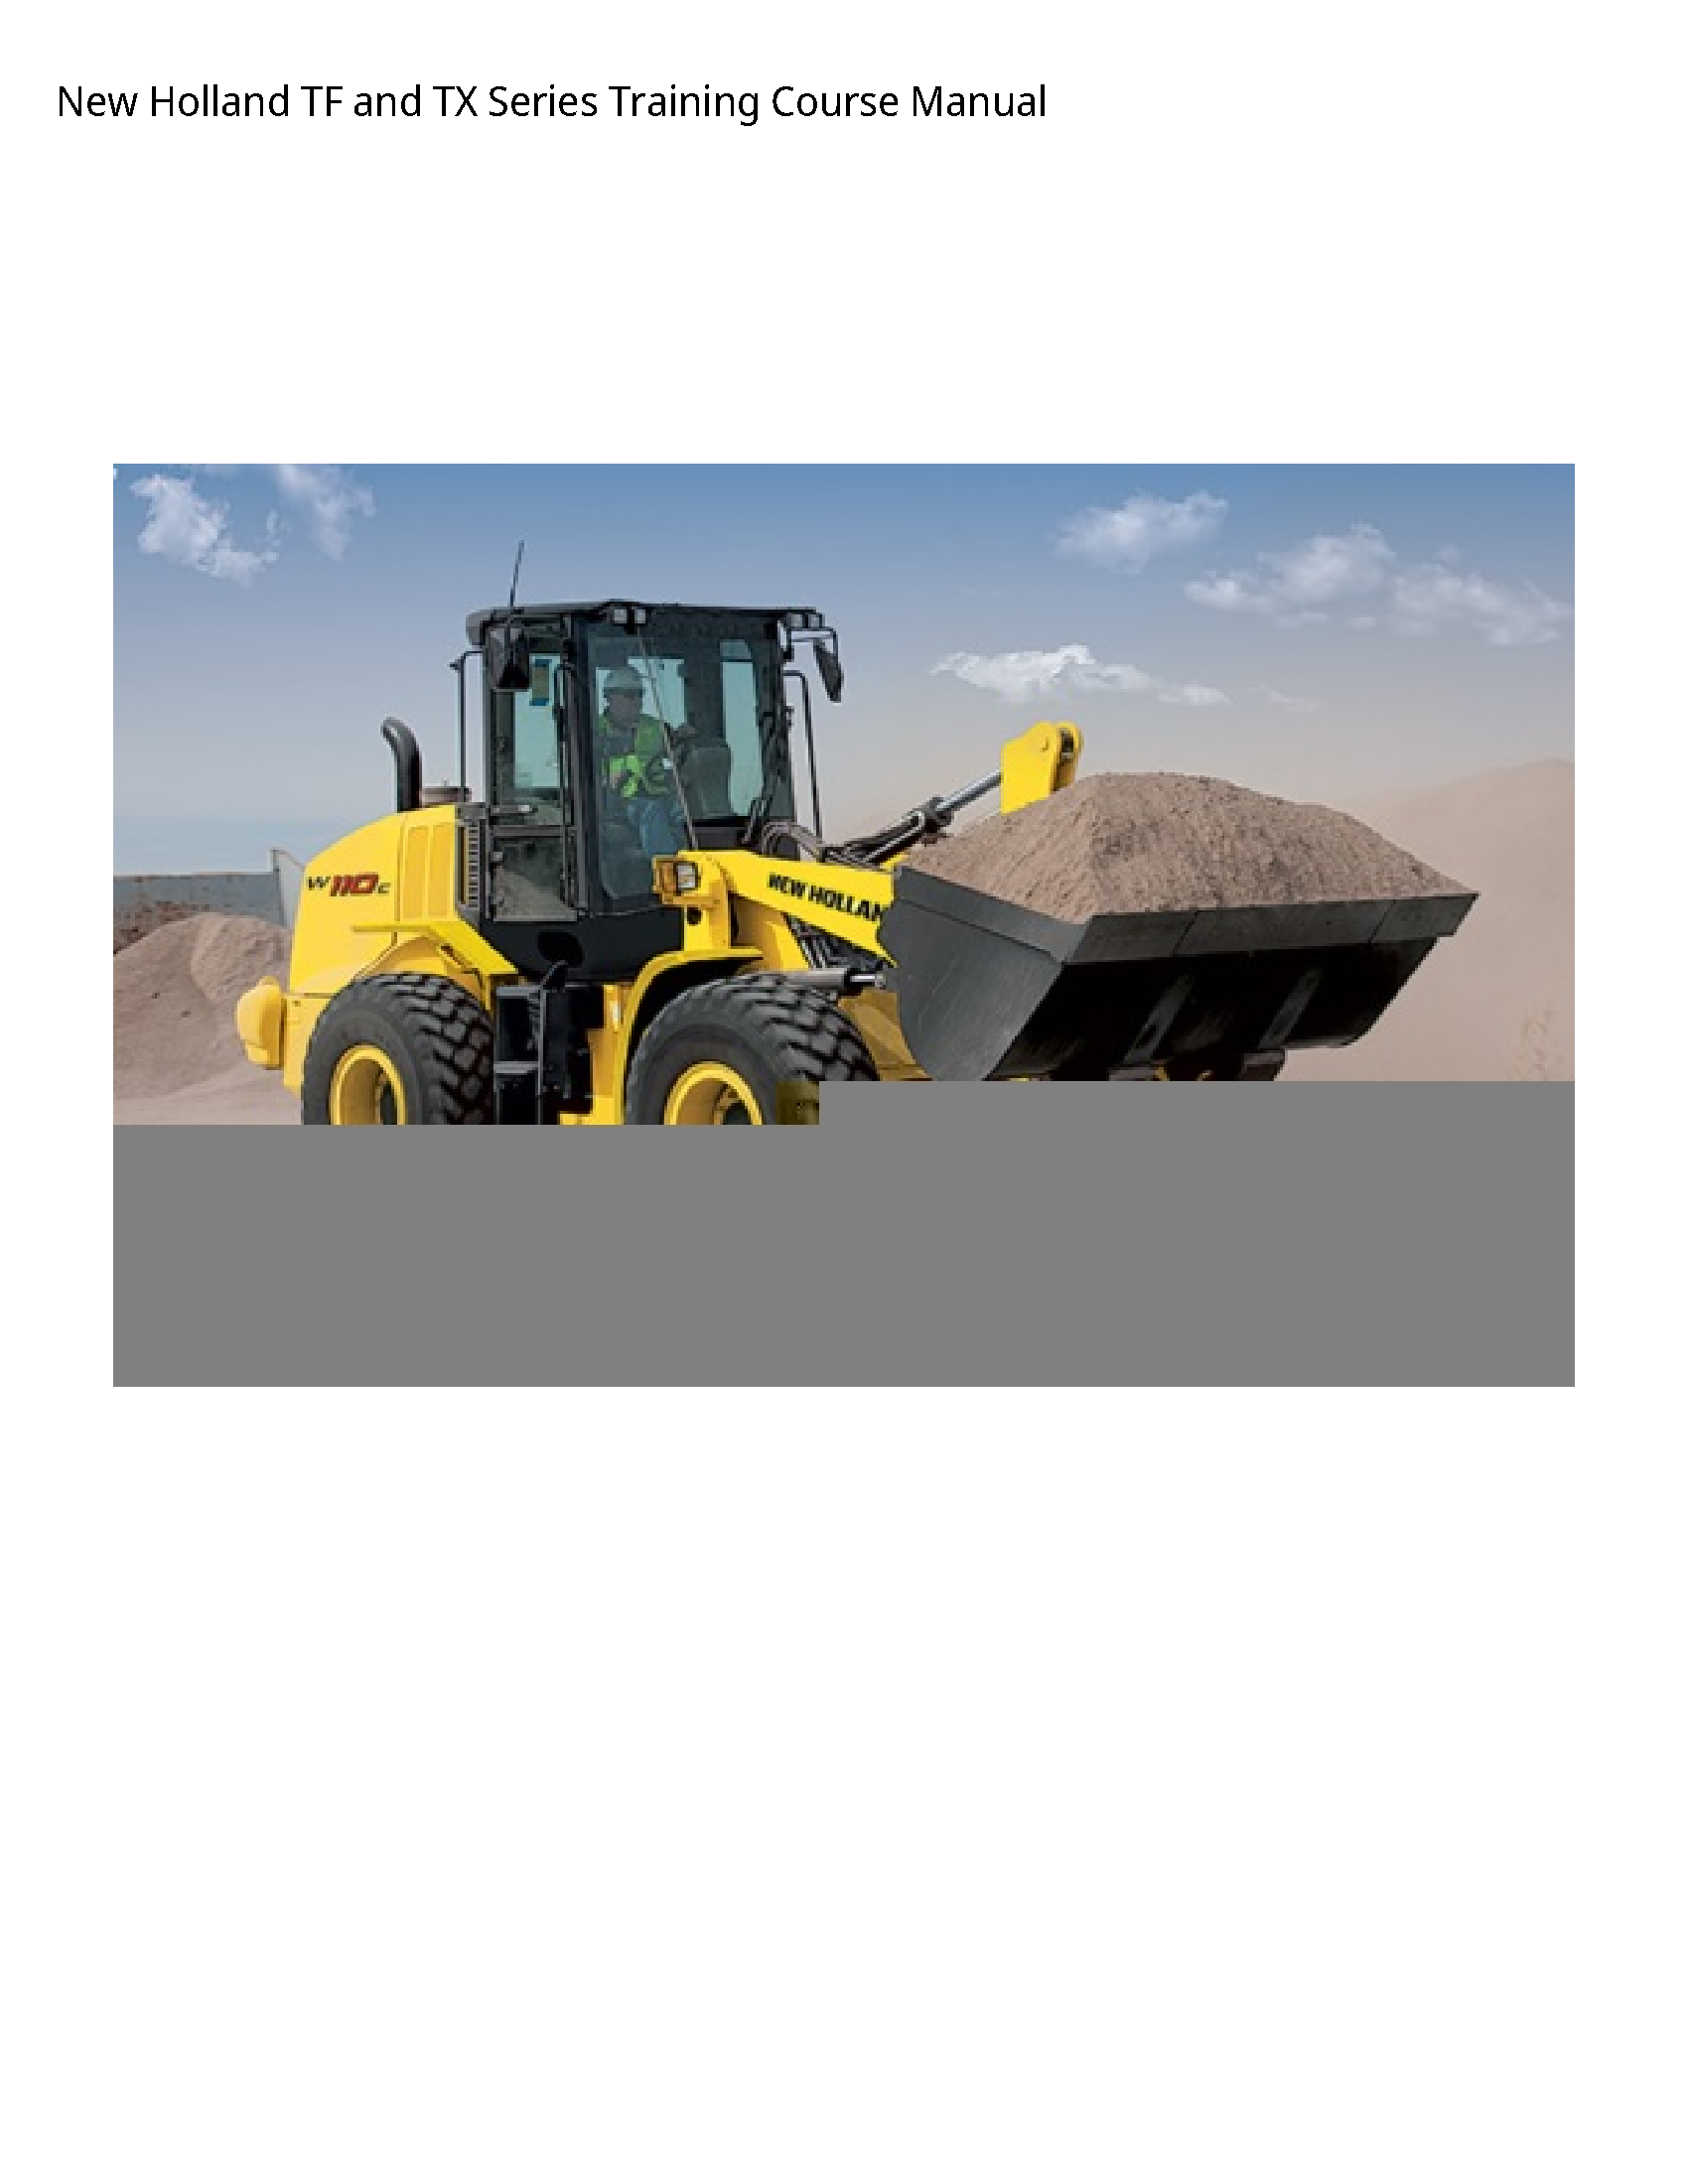 New Holland TF  TX Series Training Course manual